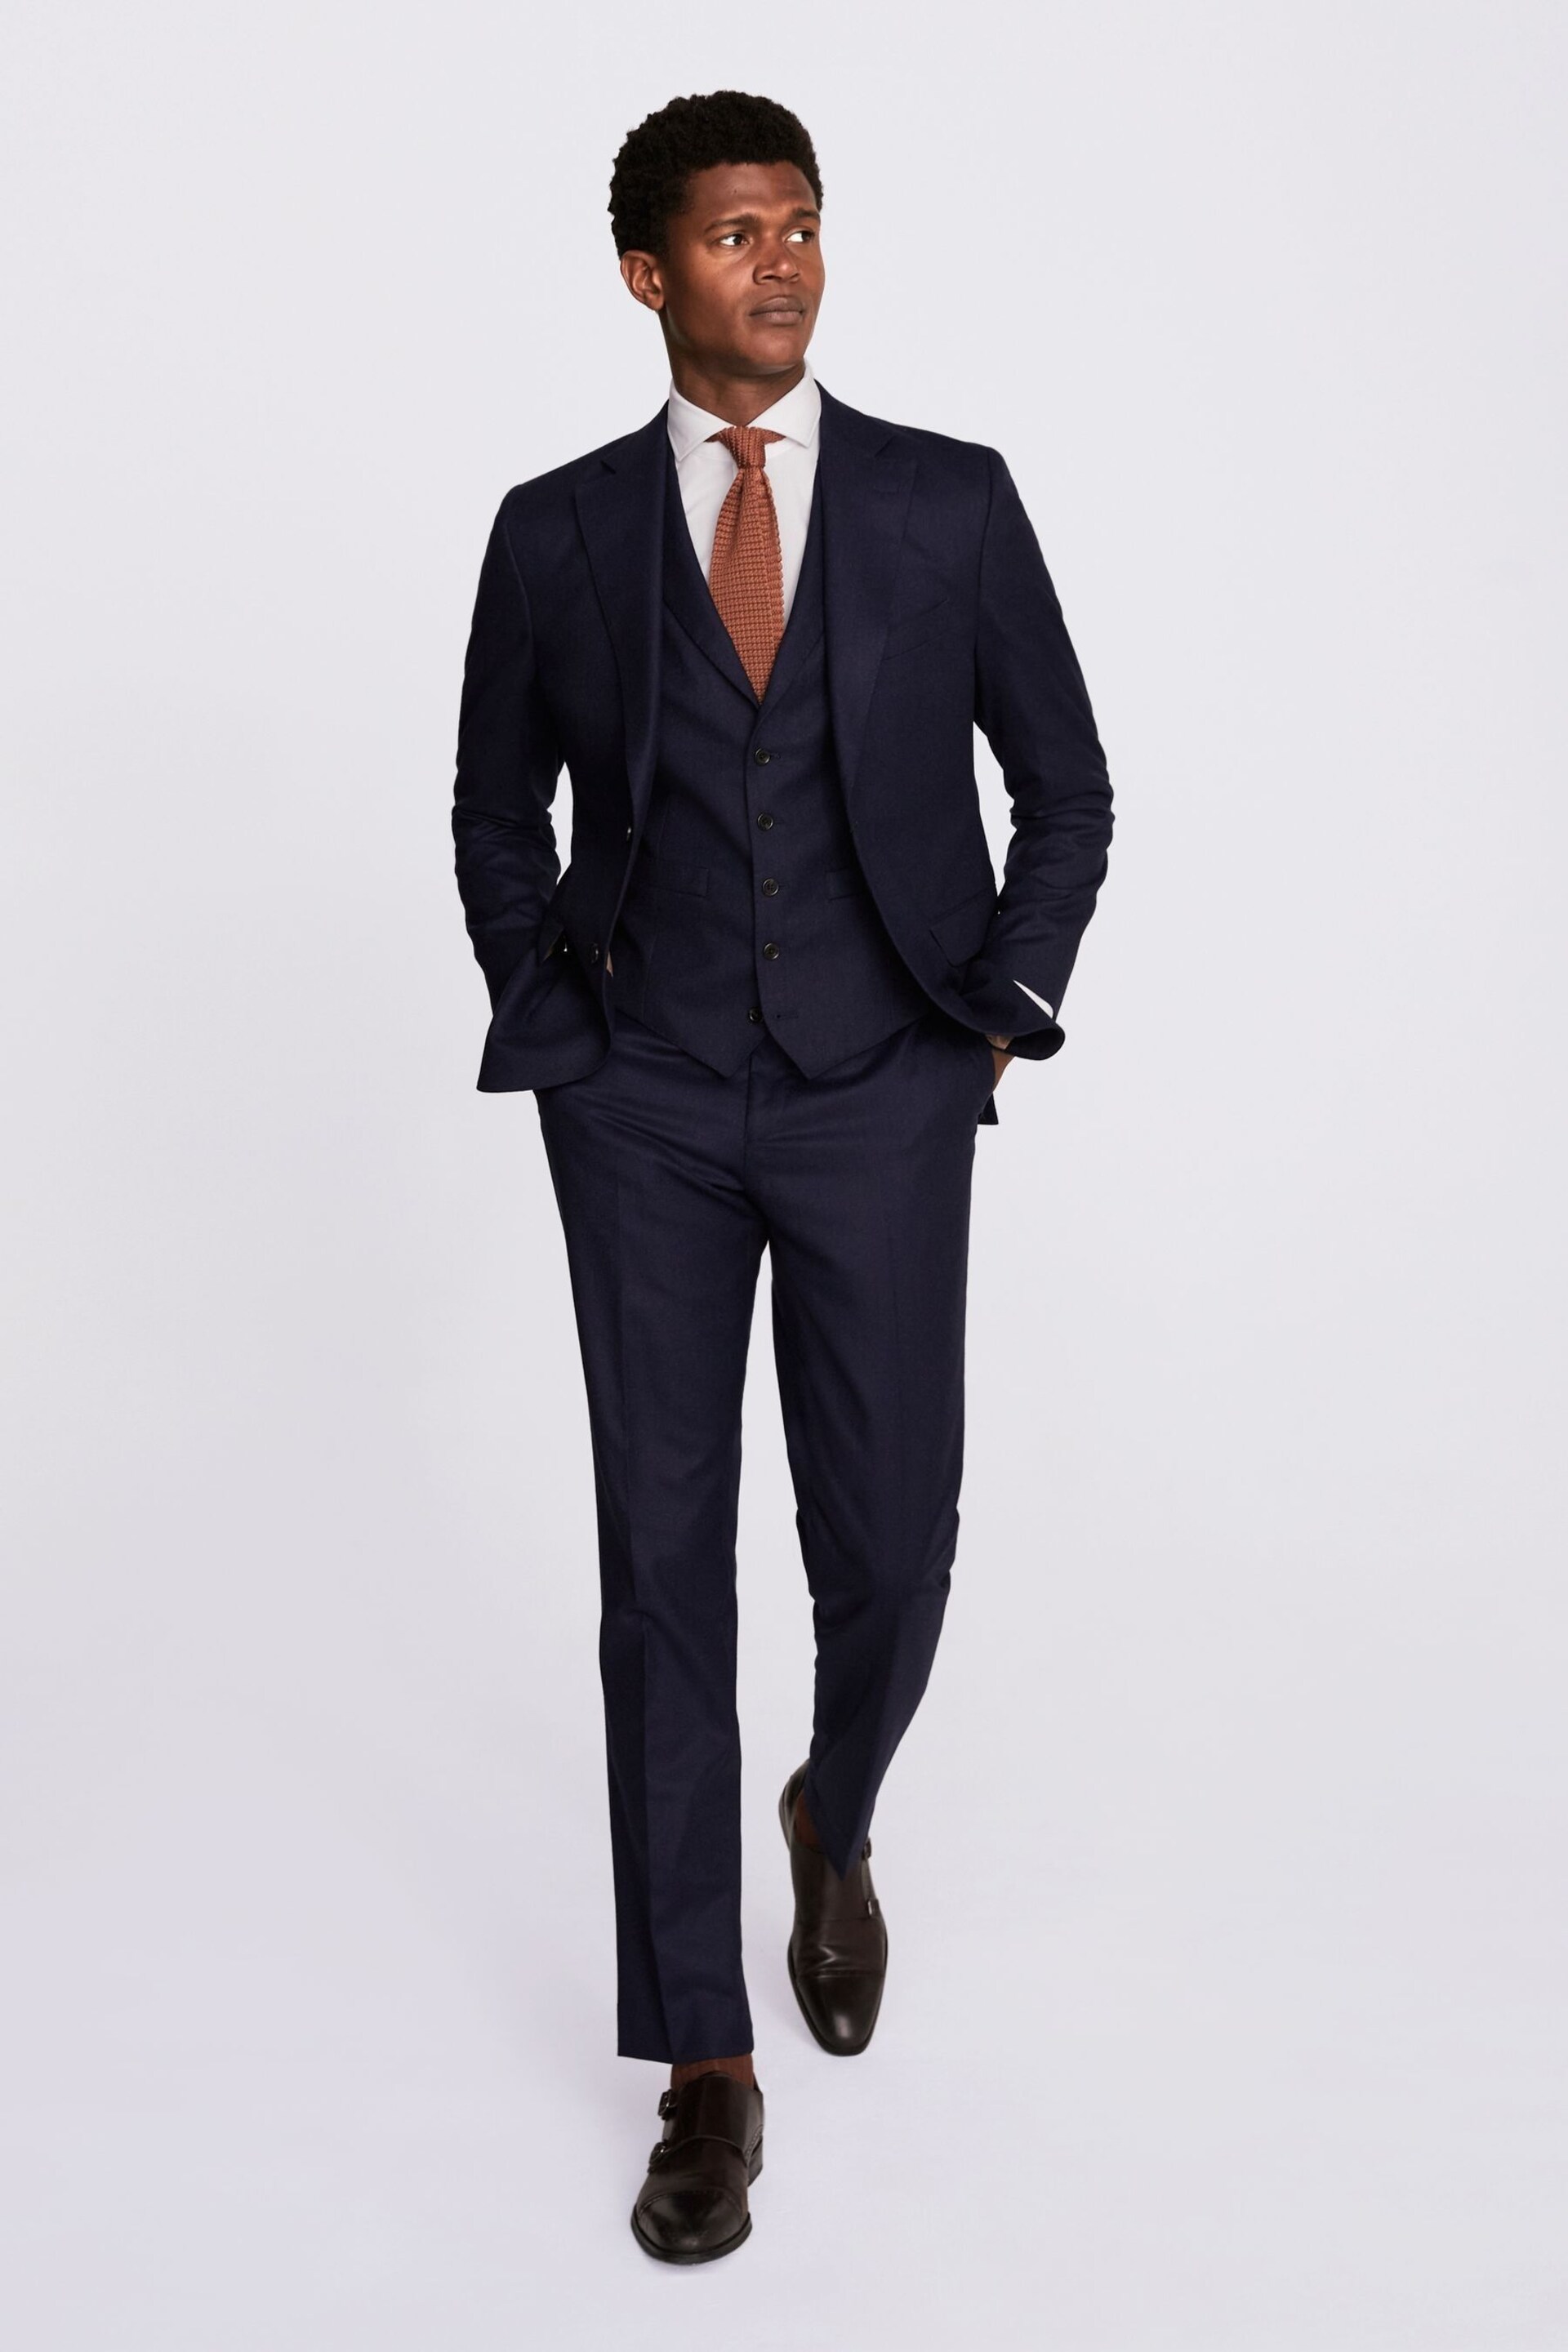 MOSS x Barberis Blue Tailored Fit Suit Jacket - Image 4 of 7